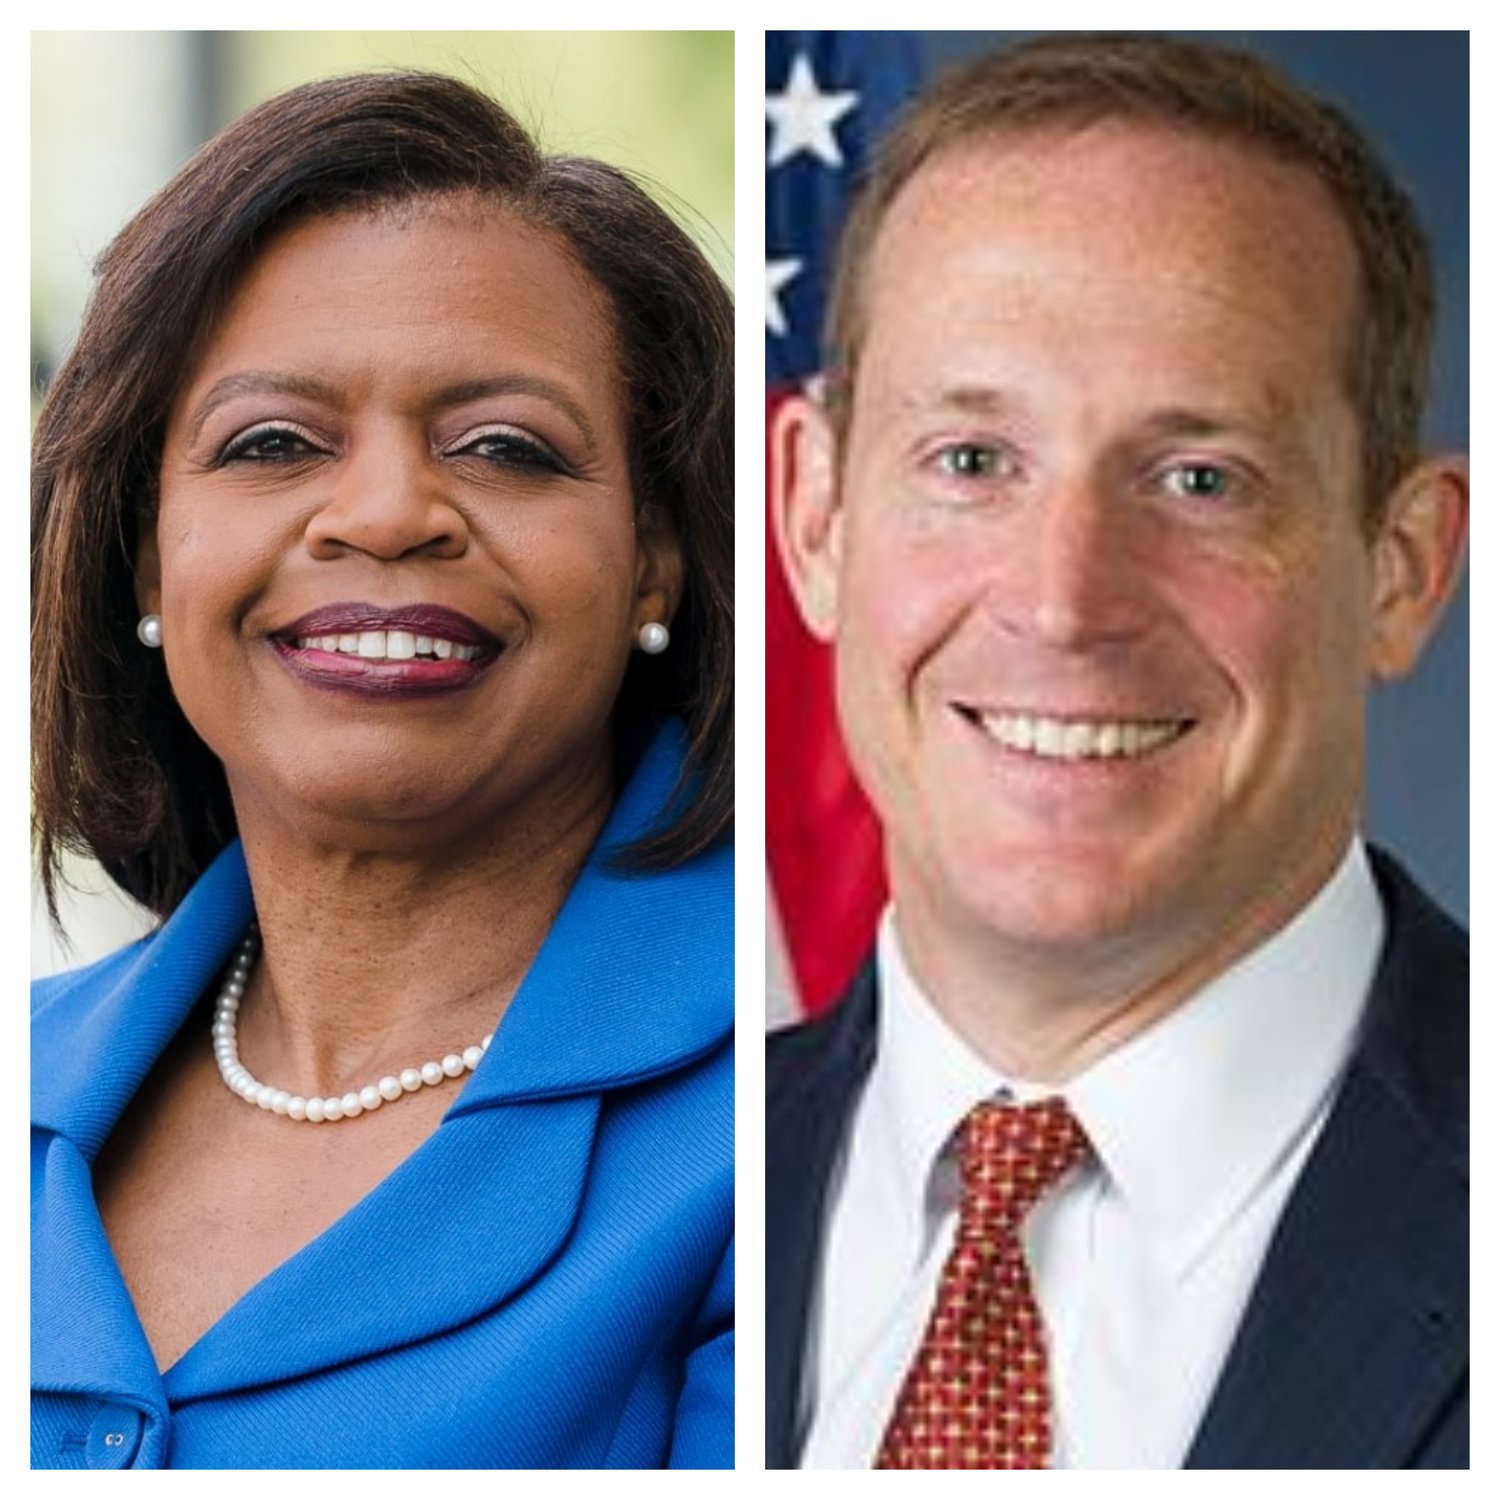 Democrat Cheri Beasley and Republican Ted Budd competed in a close race for a U.S. Senate seat representing North Carolina. Budd is the apparent winner.